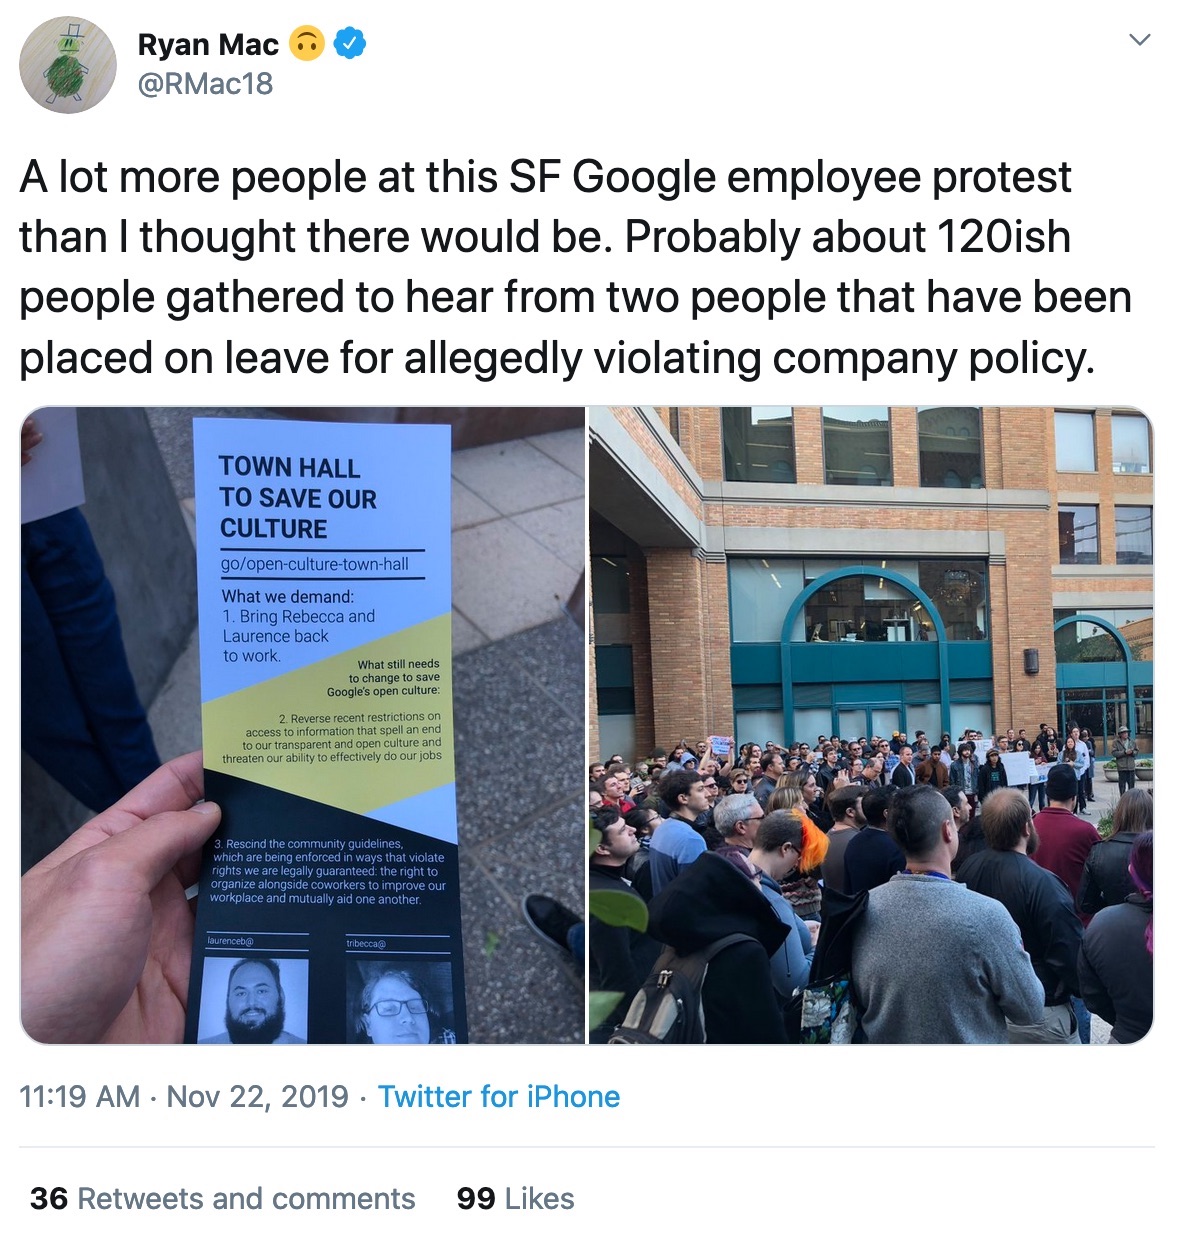 screenshot of tweet from @RMac18 reading "A lot more people at this SF Google employee protest than I thought there would be. Probably about 120ish people gathered to hear from two people that have been placed on leave for allegedly violating company policy.", one attached photo shows a crowd and the other a pamphlet that reads "Town Hall to Save Our Culture"